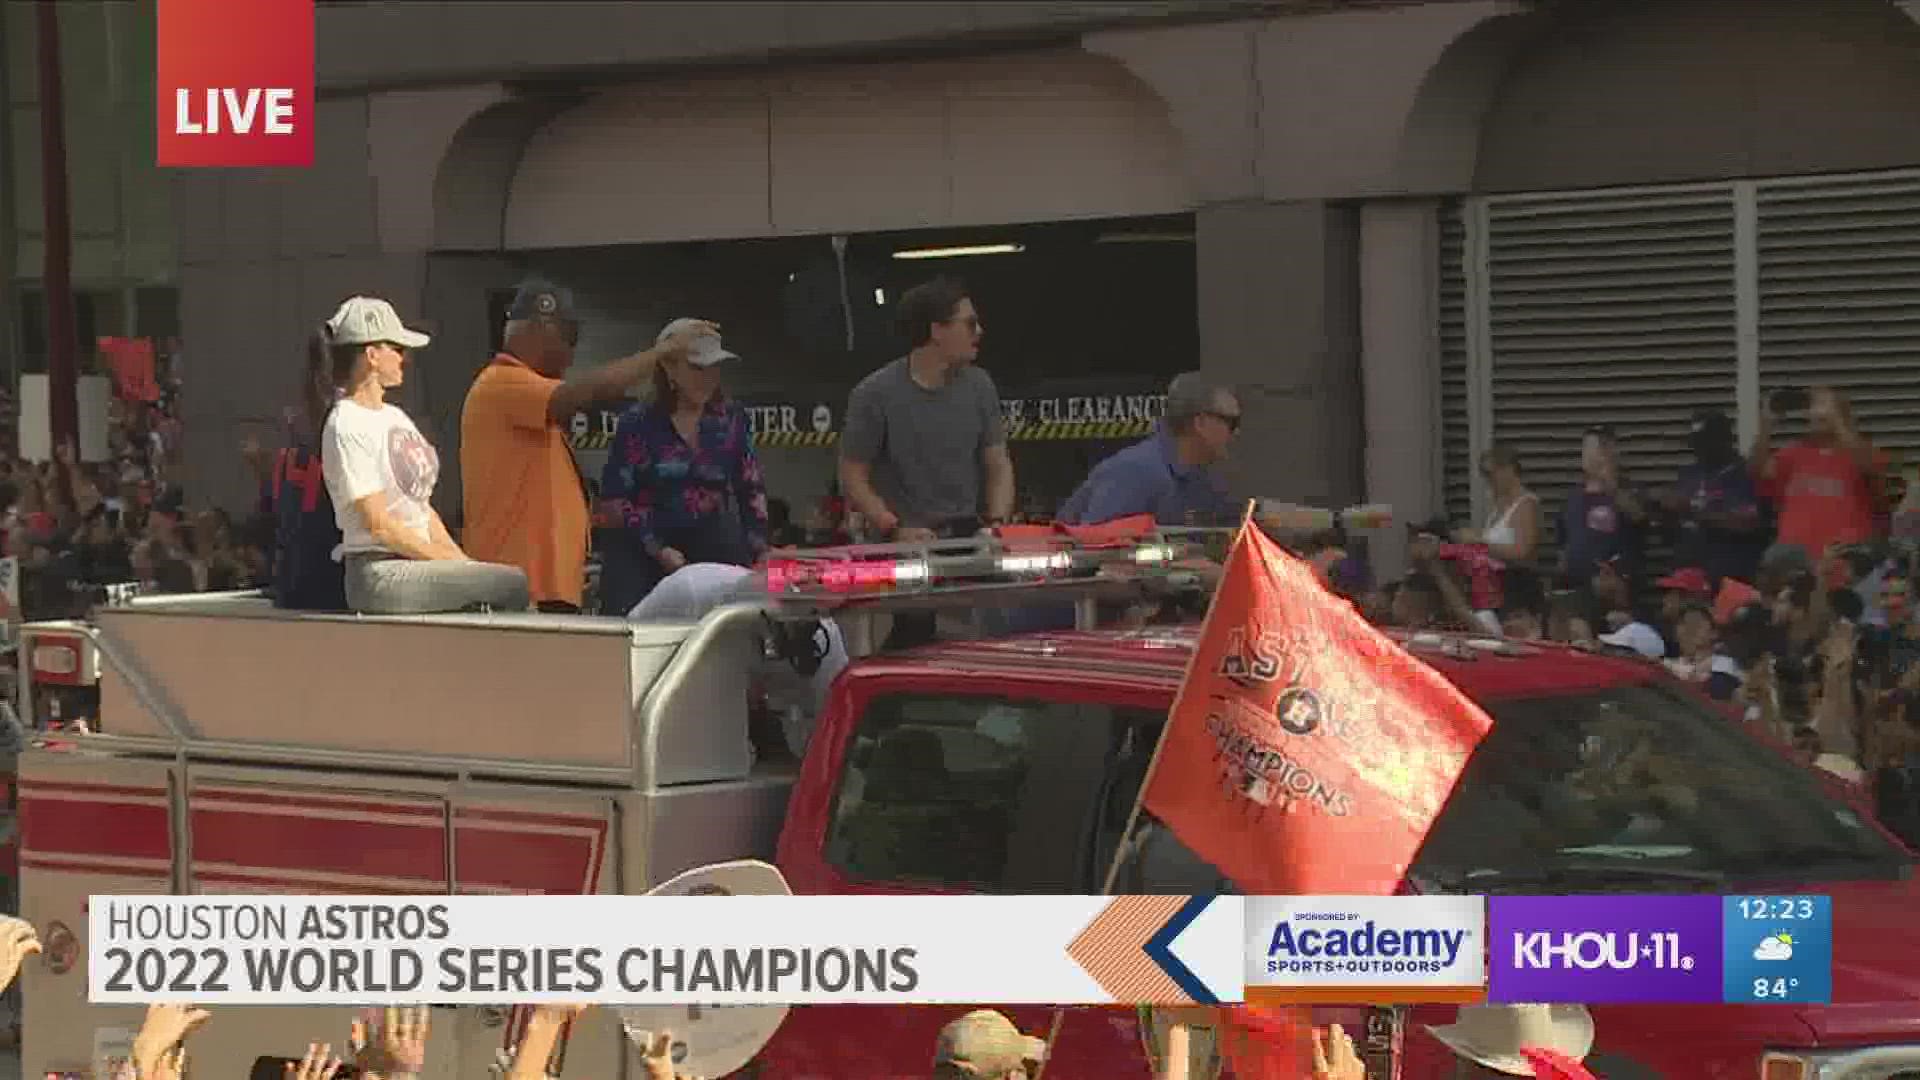 KHOU 11 News - ICYMI: Craig Biggio and Jeff Bagwell greeted fans during the  World Series Championship Parade! 📸⚾📸⚾📸 More photos-------->